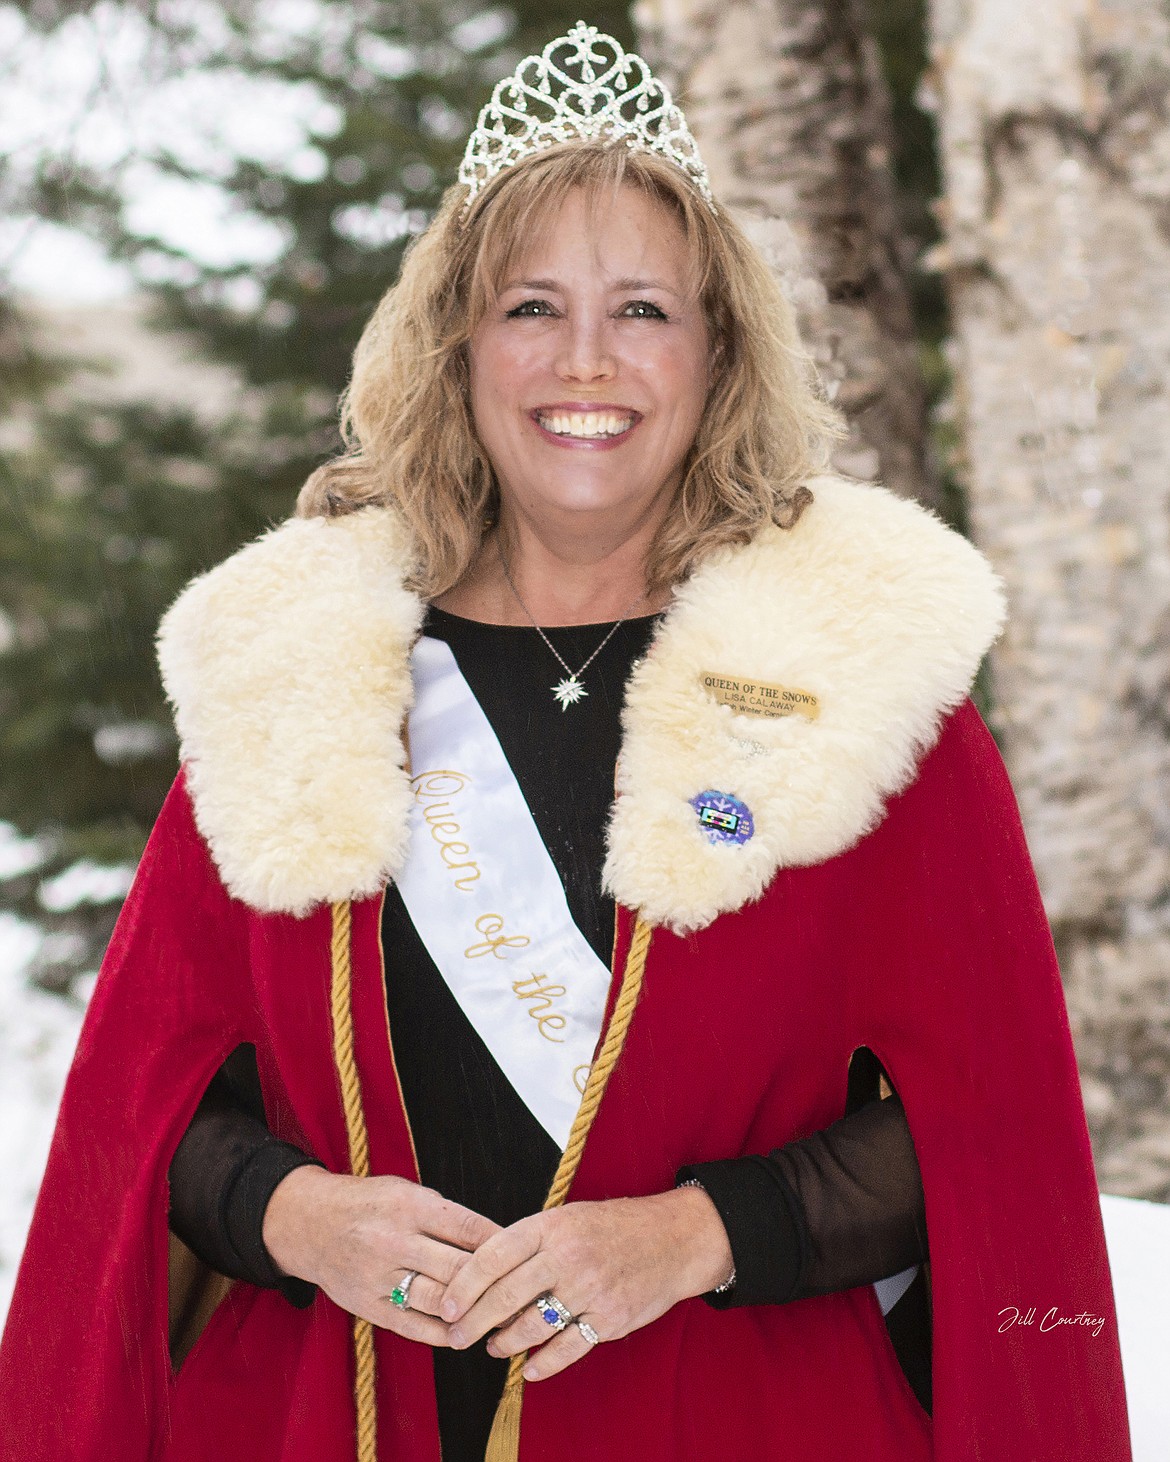 Lisa Calaway was crowned Whitefish Winter Carnival Queen of the Snows on Saturday. (Jill Courtney photo)